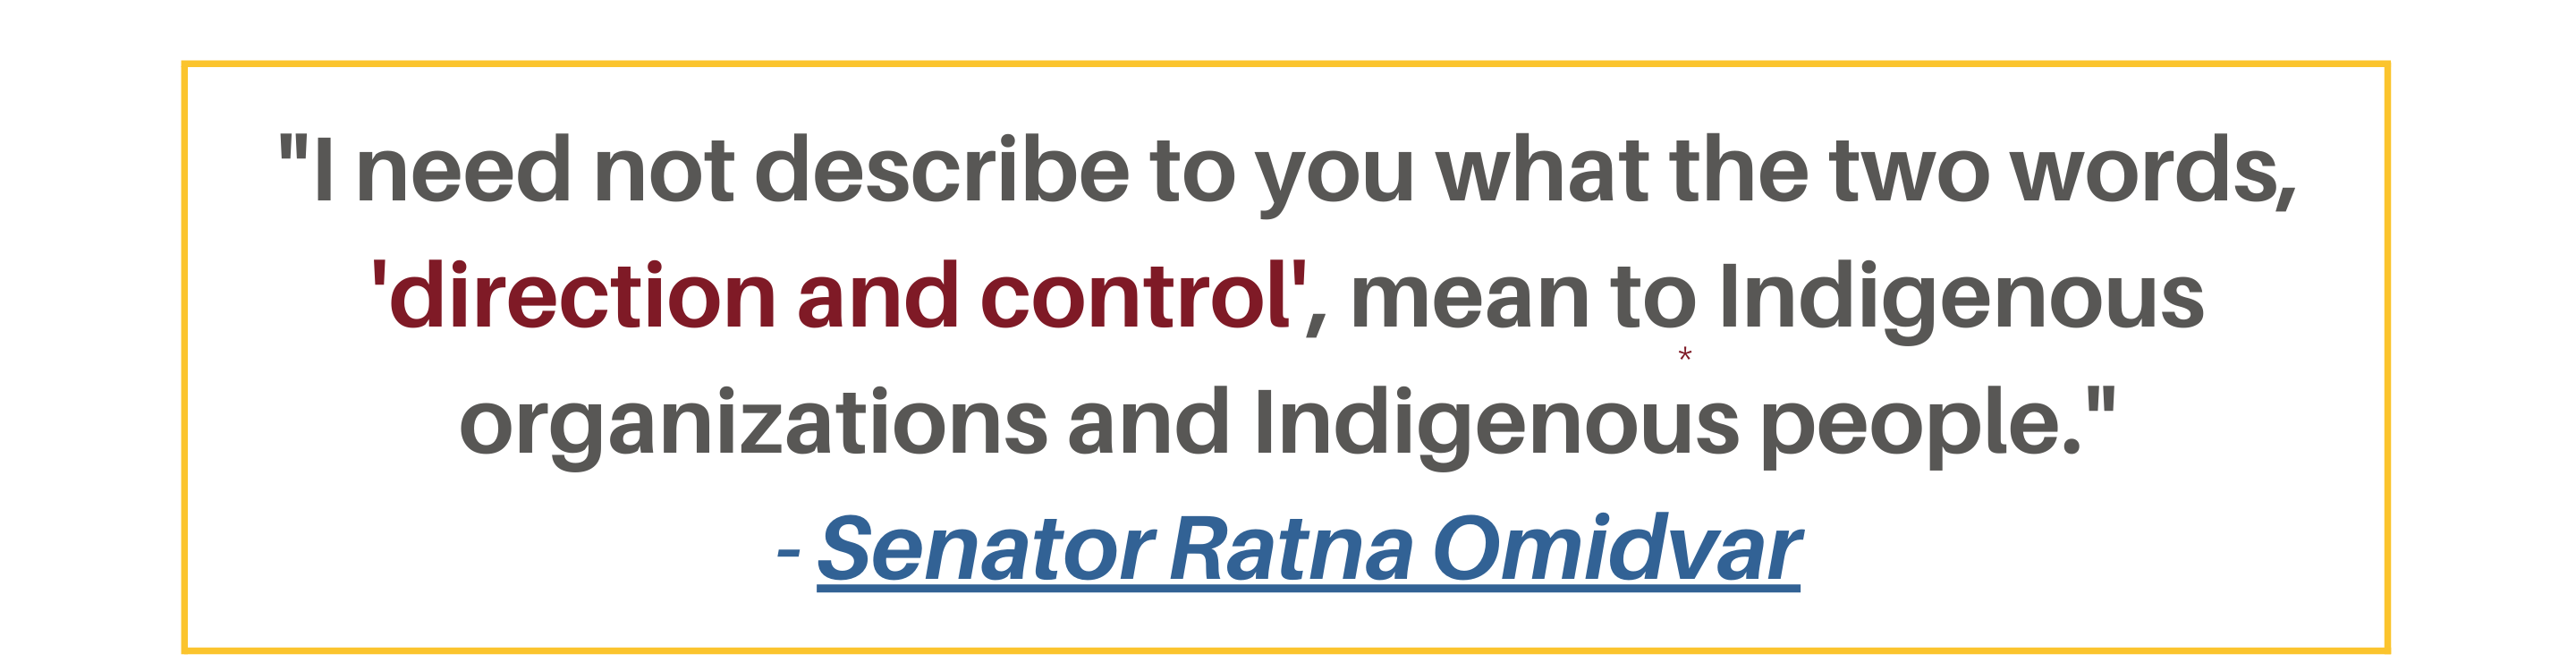 "I need not describe to you what the two words, 'direction and control', mean to Indigenous organizations and Indigenous people." - Senator Ratna Omidvar